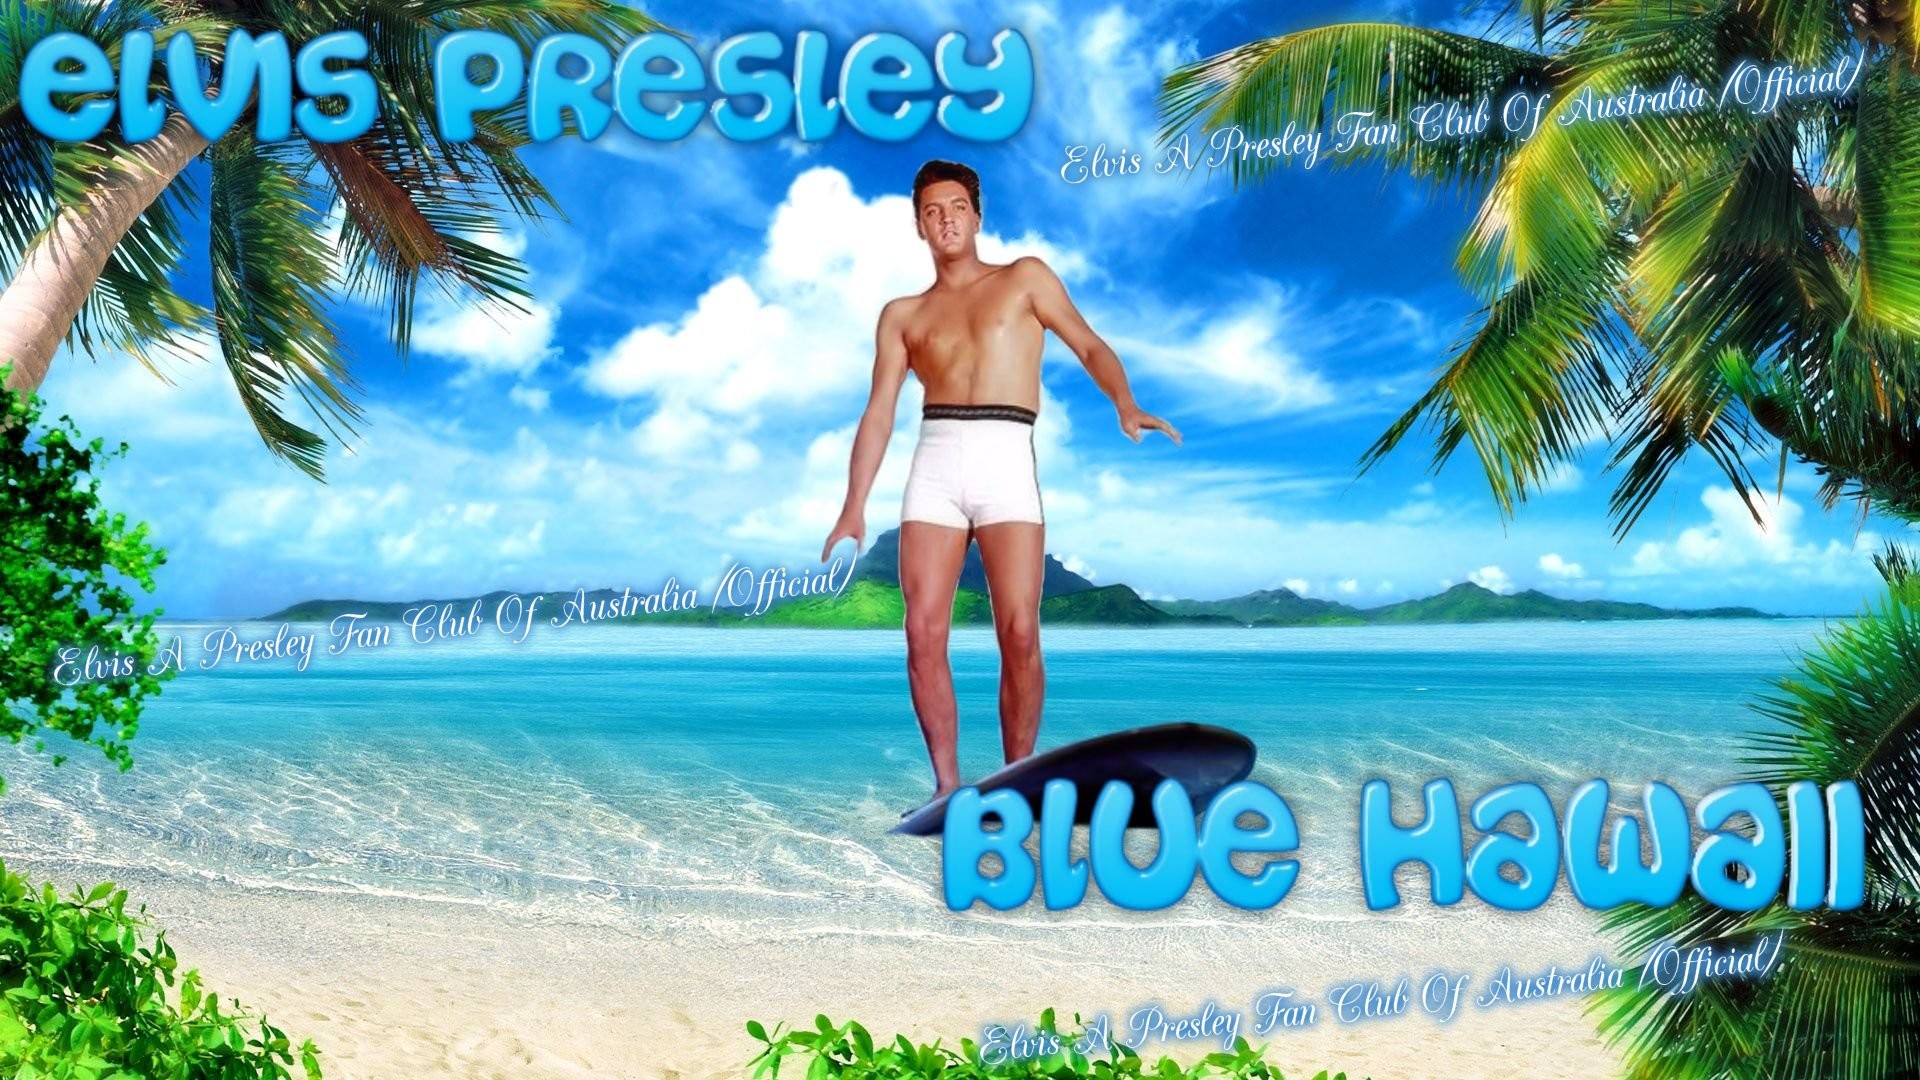 1920x1080 Elvis A Presley Fan Club Of Australia images blue Hawaii Wallpaper HD  wallpaper and background photos